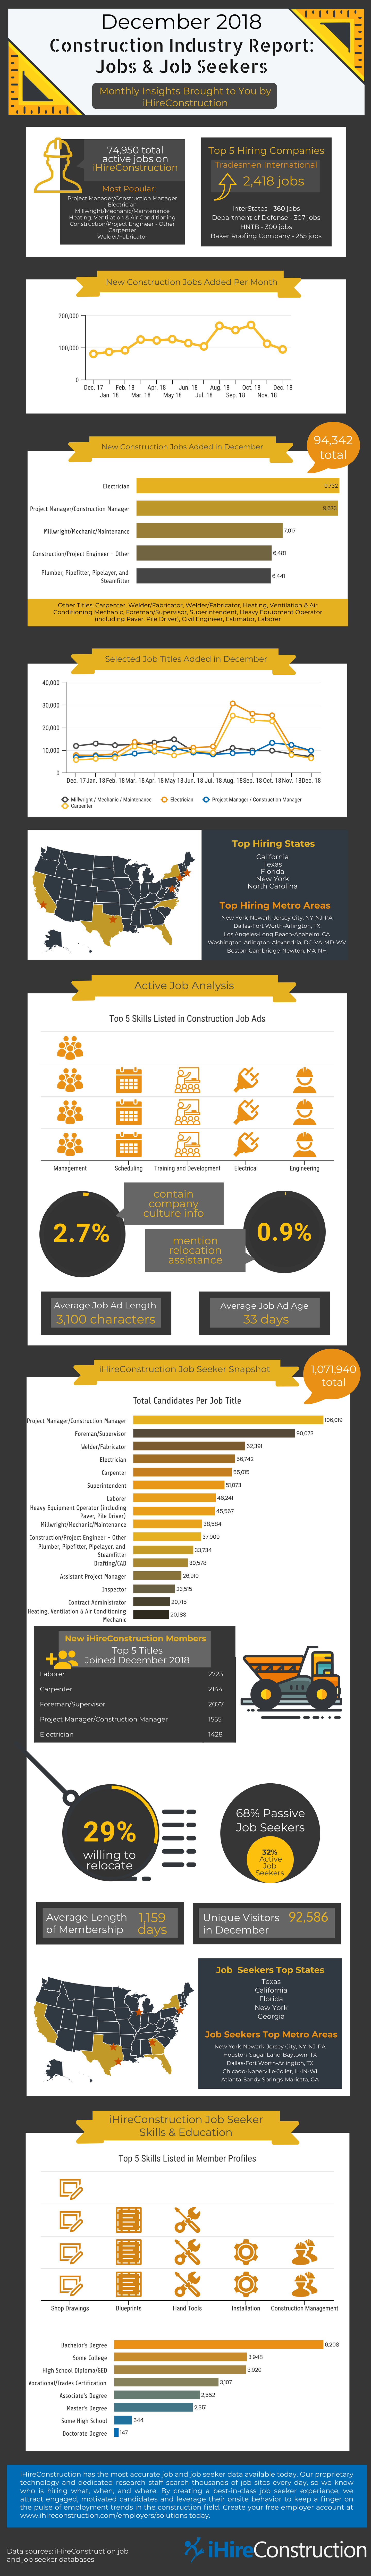 iHireConstruction's December 2018 industry report on construction jobs and job seekers. Infographic.